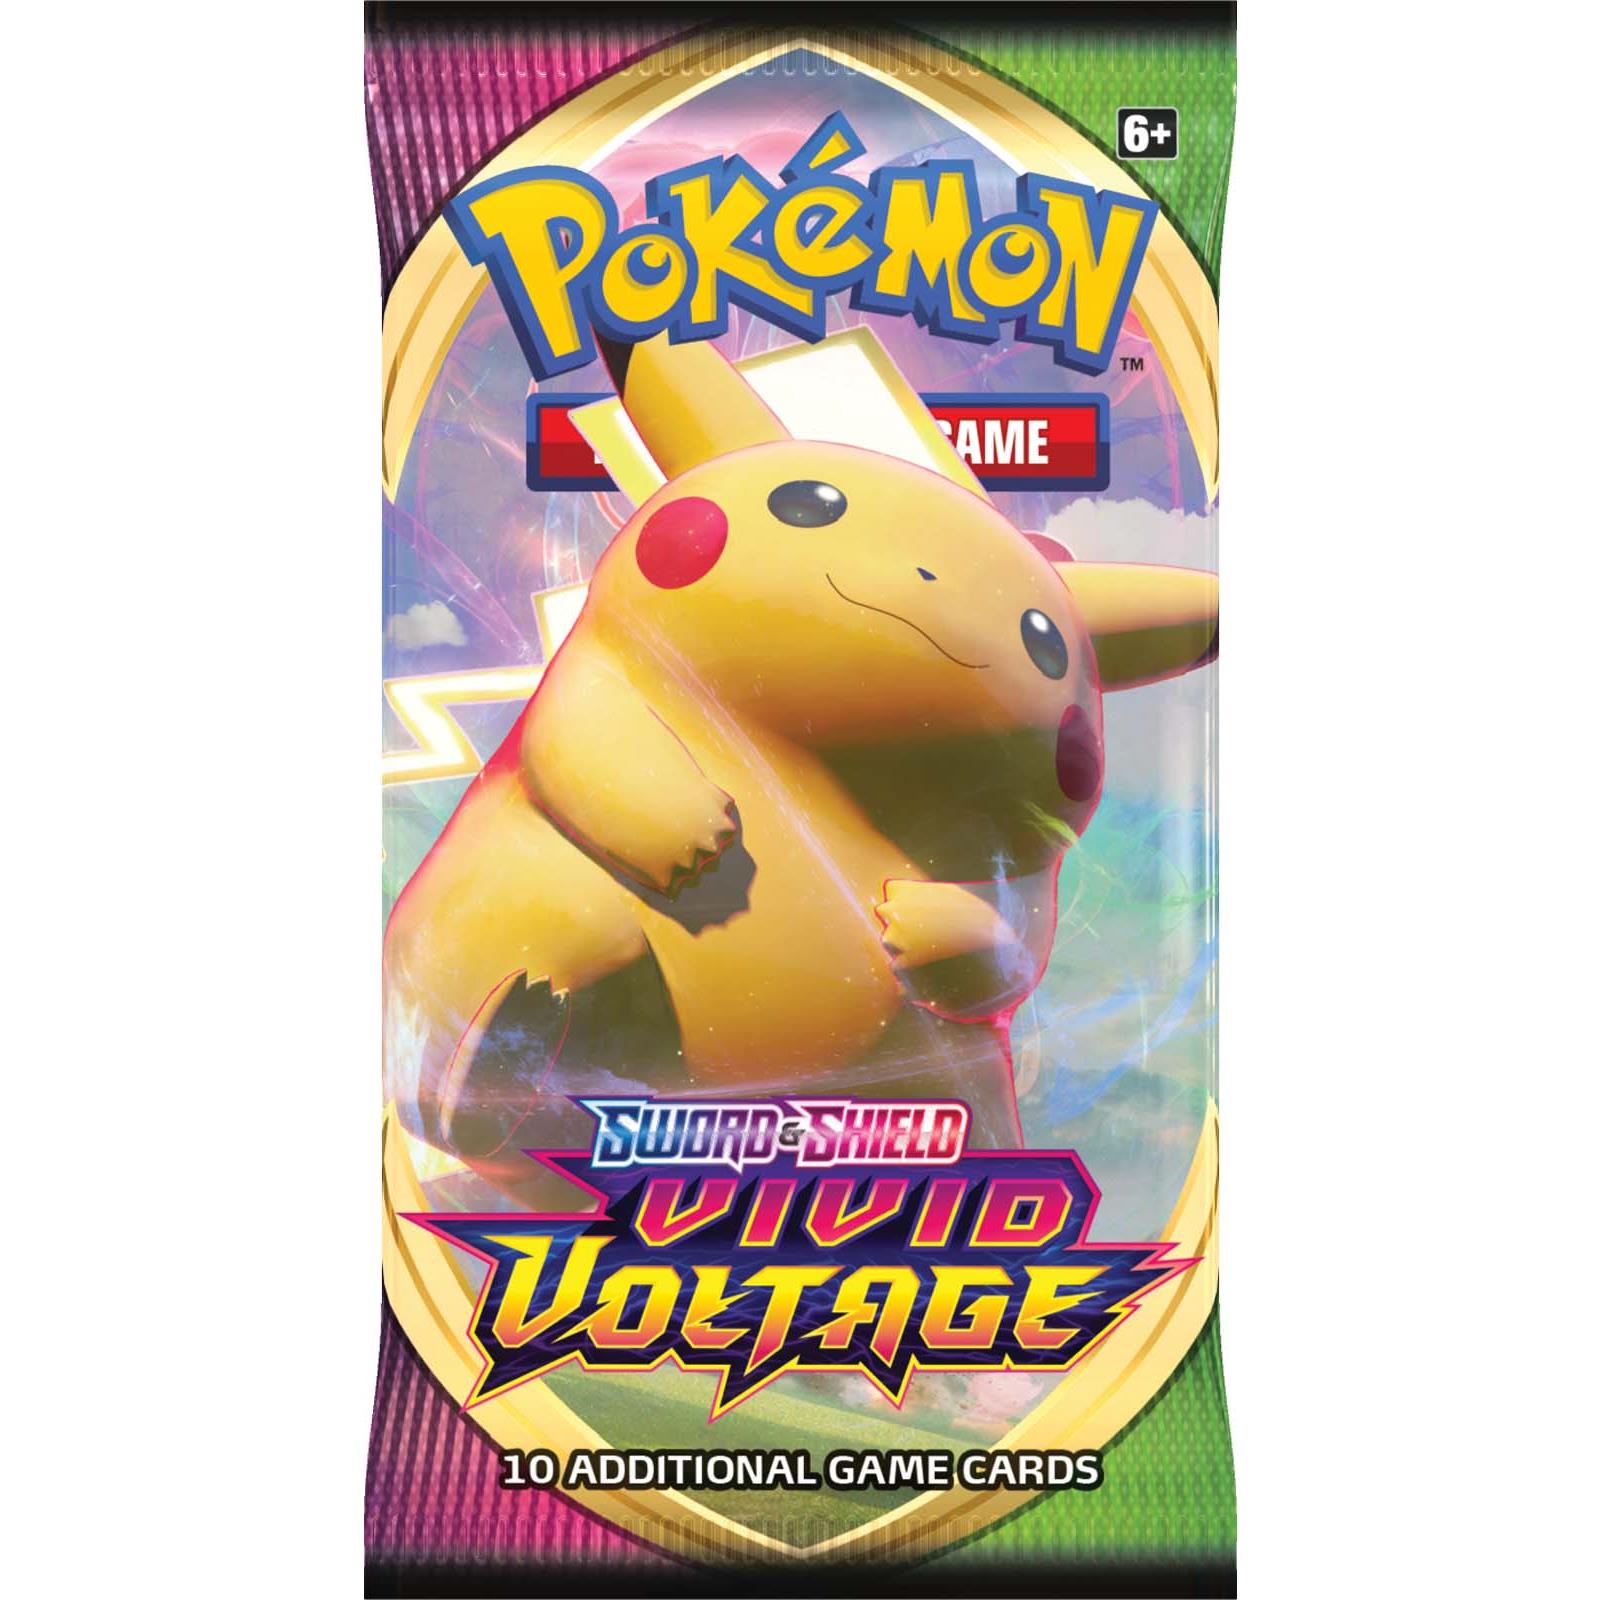 pokémon tcg sword and shield- vivad voltage booster pack